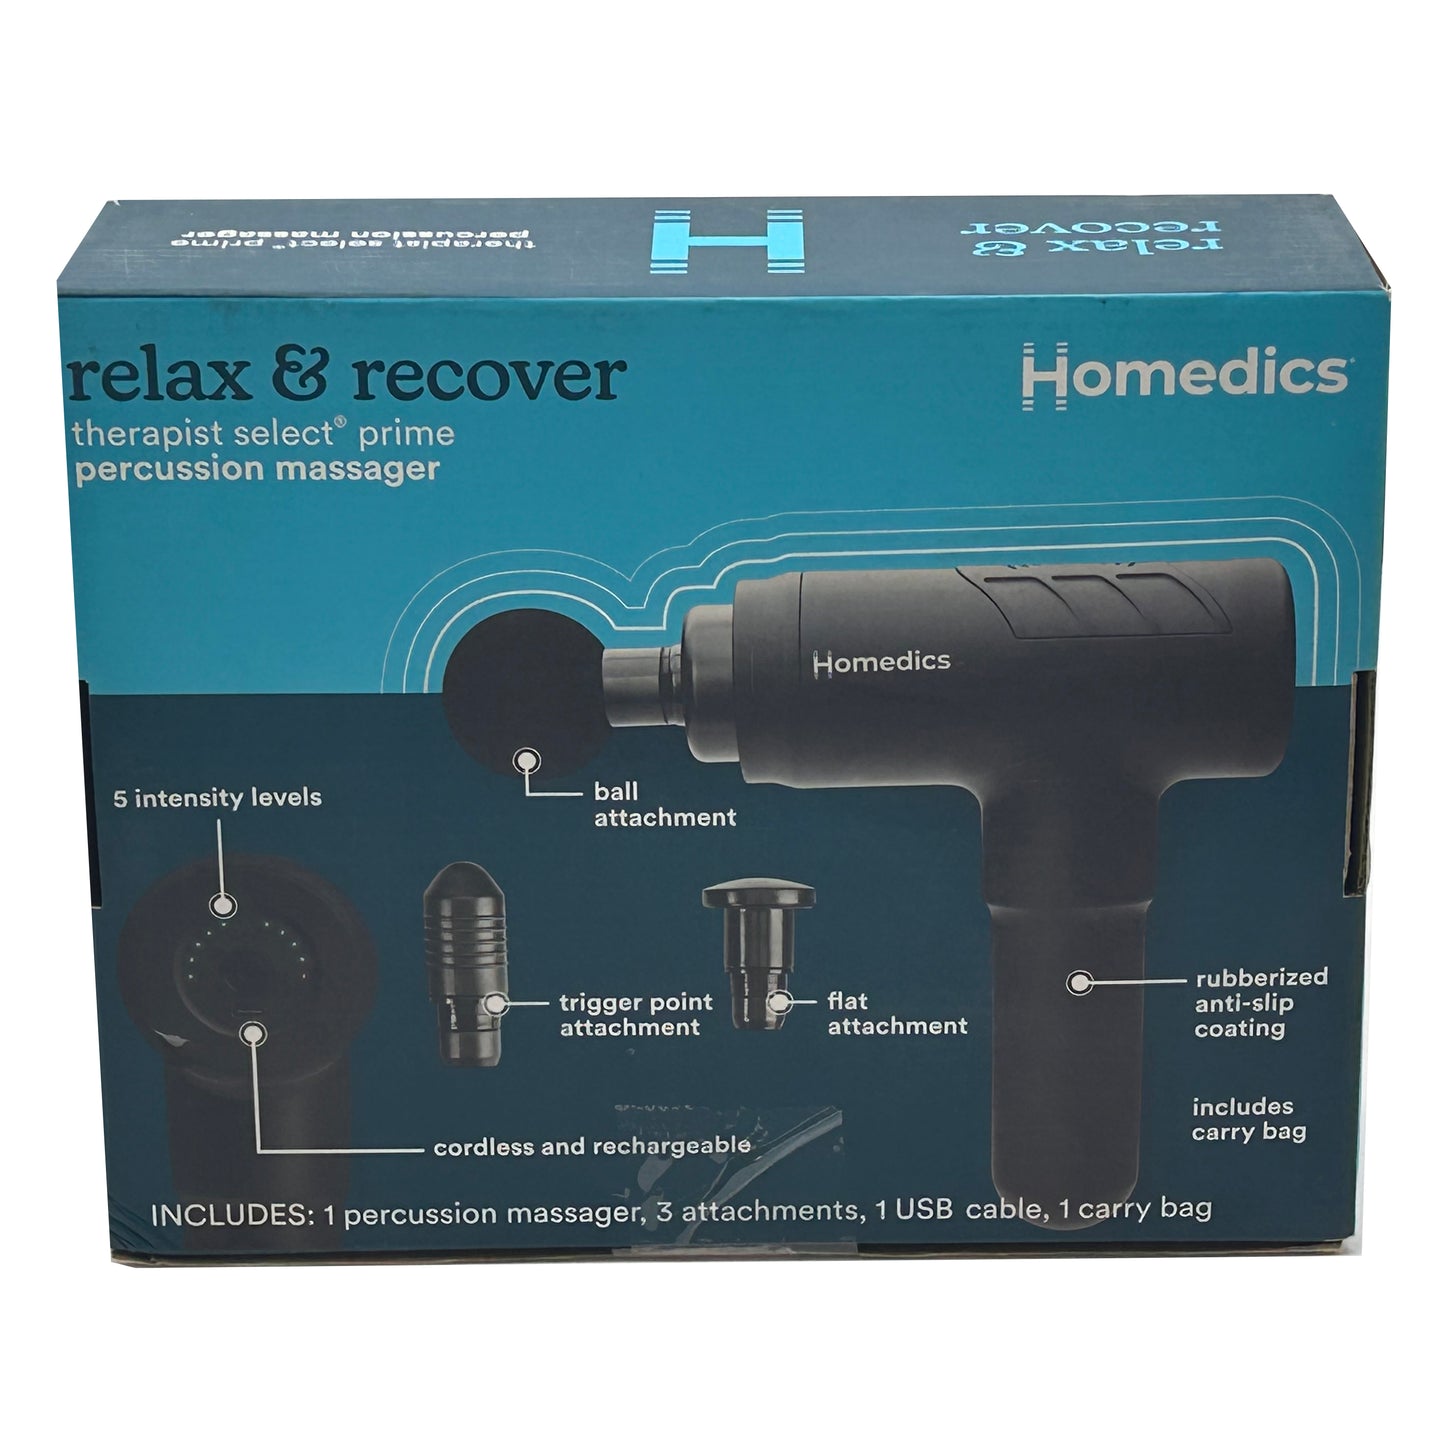 Homedics Relax & Recover Therapist Select Prime Percussion Massager - Grade A Refurbished